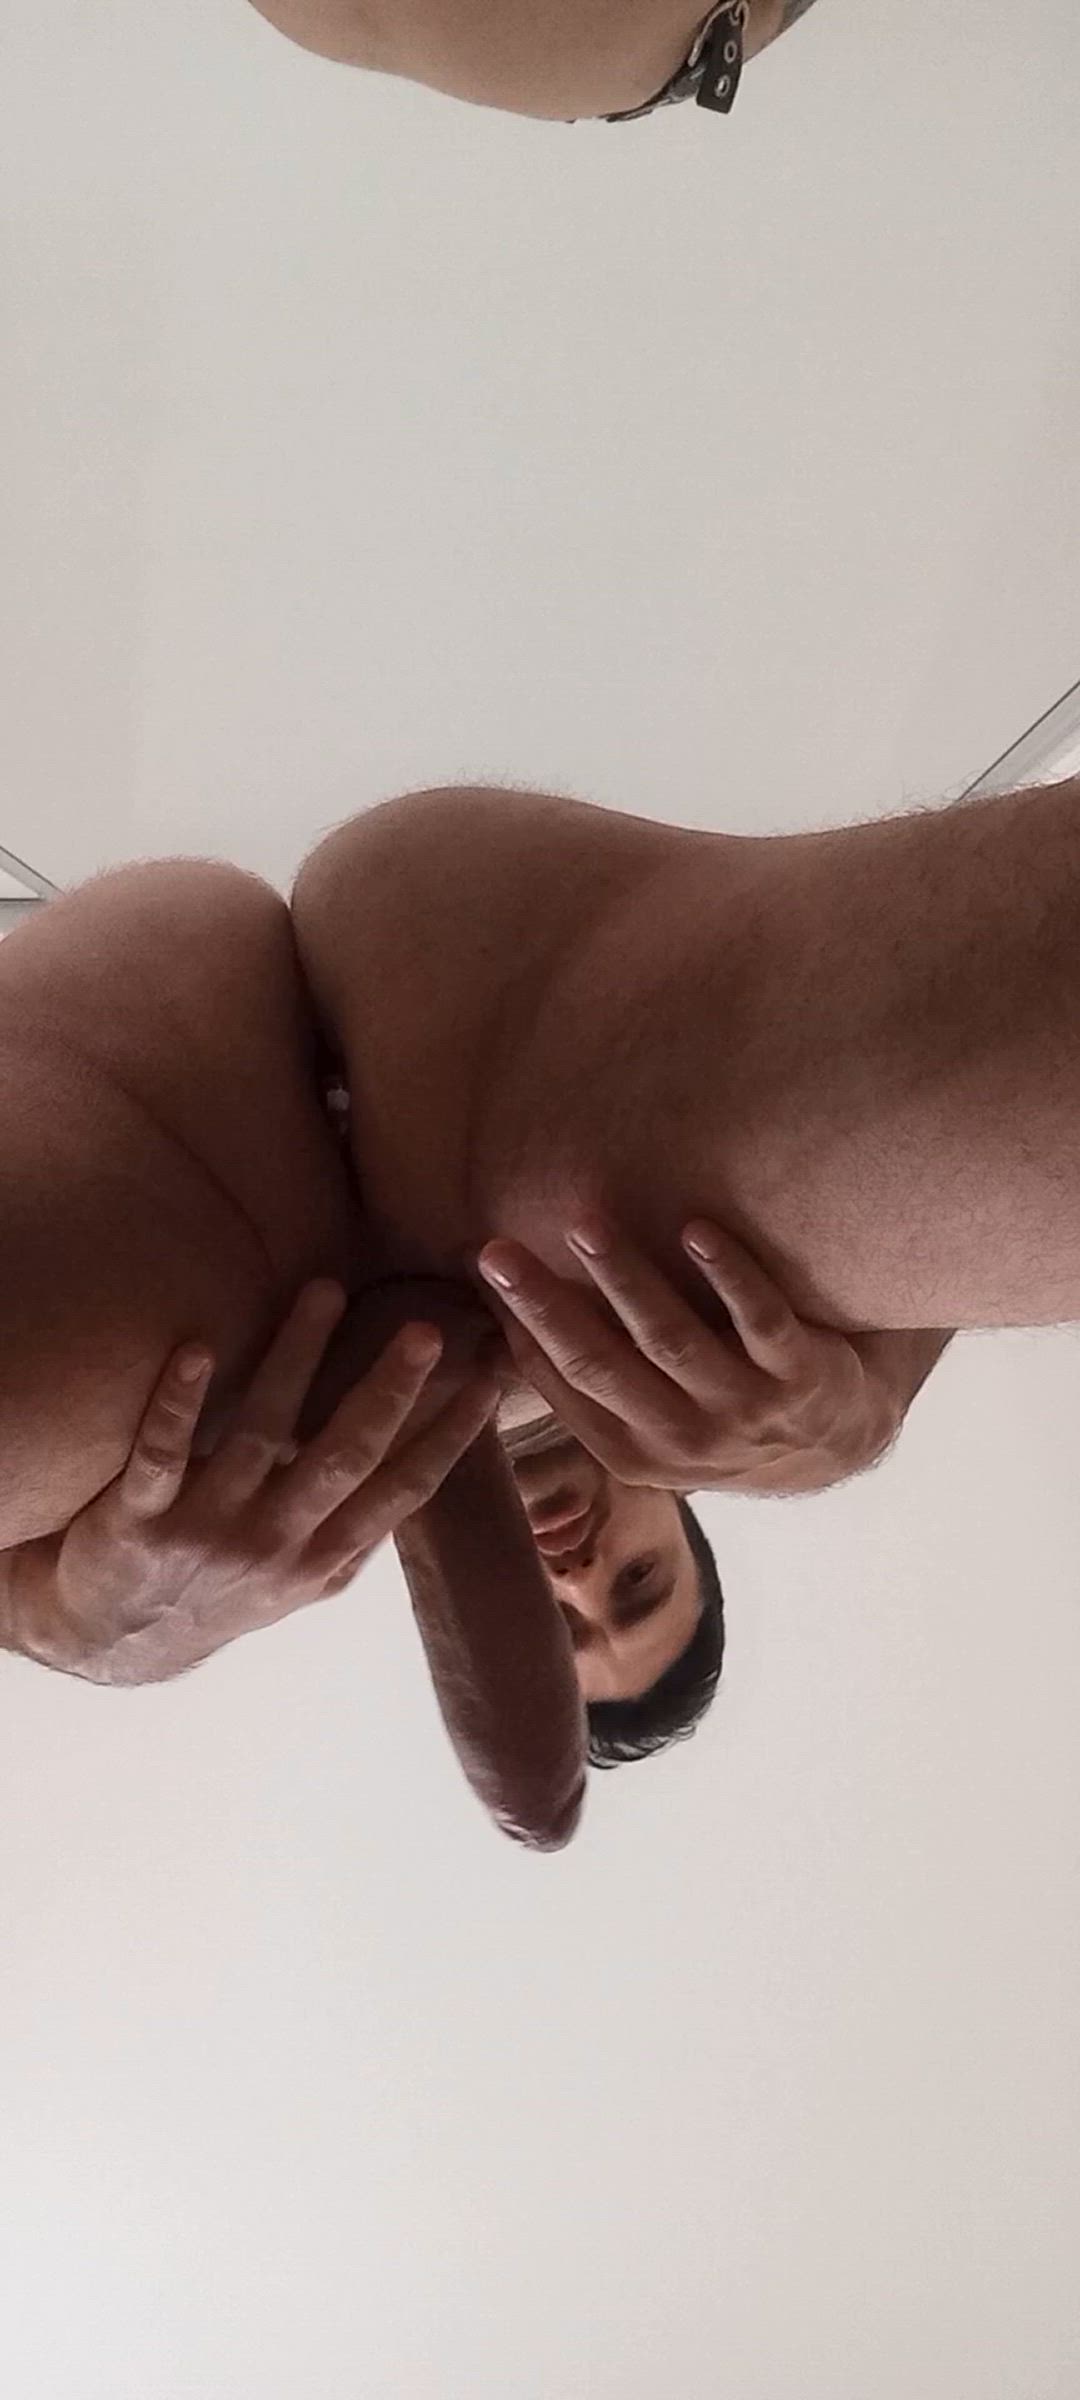 Ass porn video with onlyfans model Feegoo <strong>@xfegox</strong>